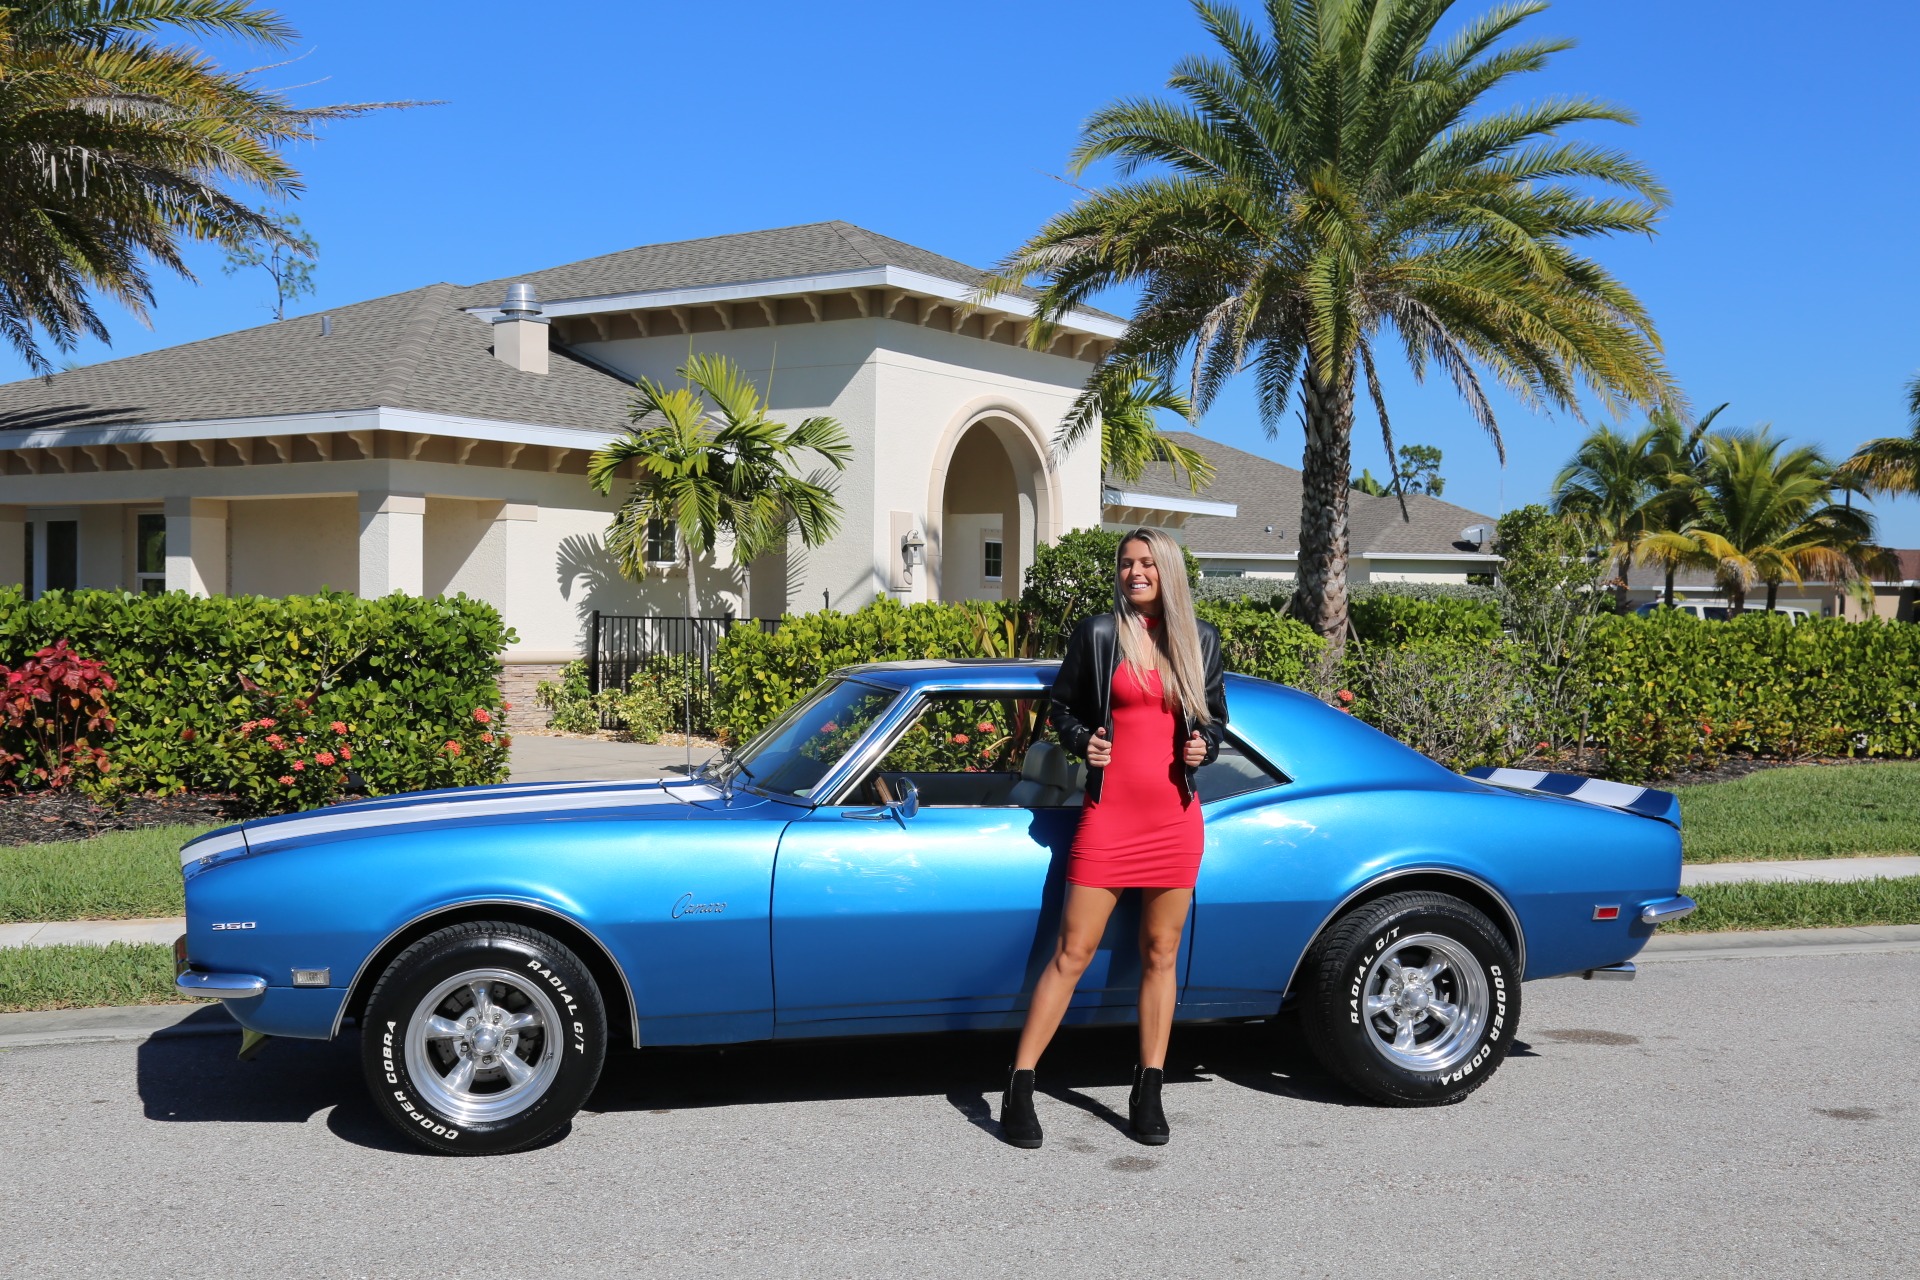 Used 1968 Chevy Camaro Coupe 4 Speed manual 350 stroked to 383 Engine AC for sale Sold at Muscle Cars for Sale Inc. in Fort Myers FL 33912 2